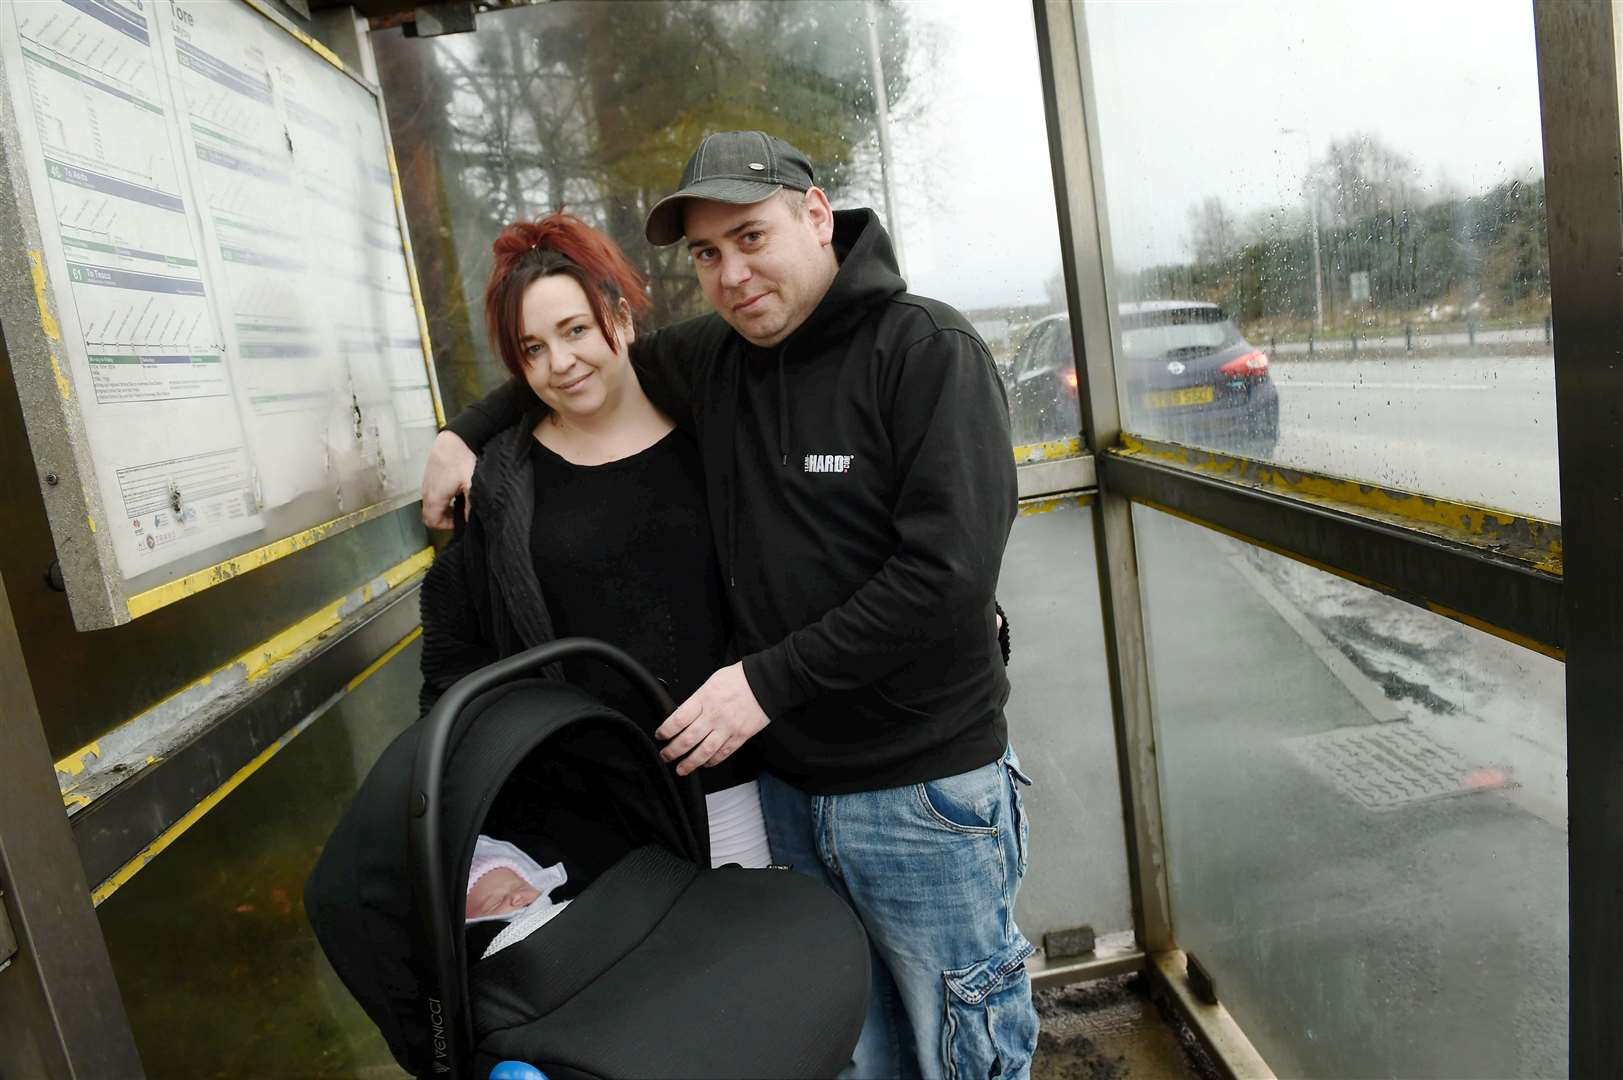 Amanda Jolly and Andy MacKay with daughter Faith MacKay who was born at the southbound bus stop on the A9 near Tore roundabout.